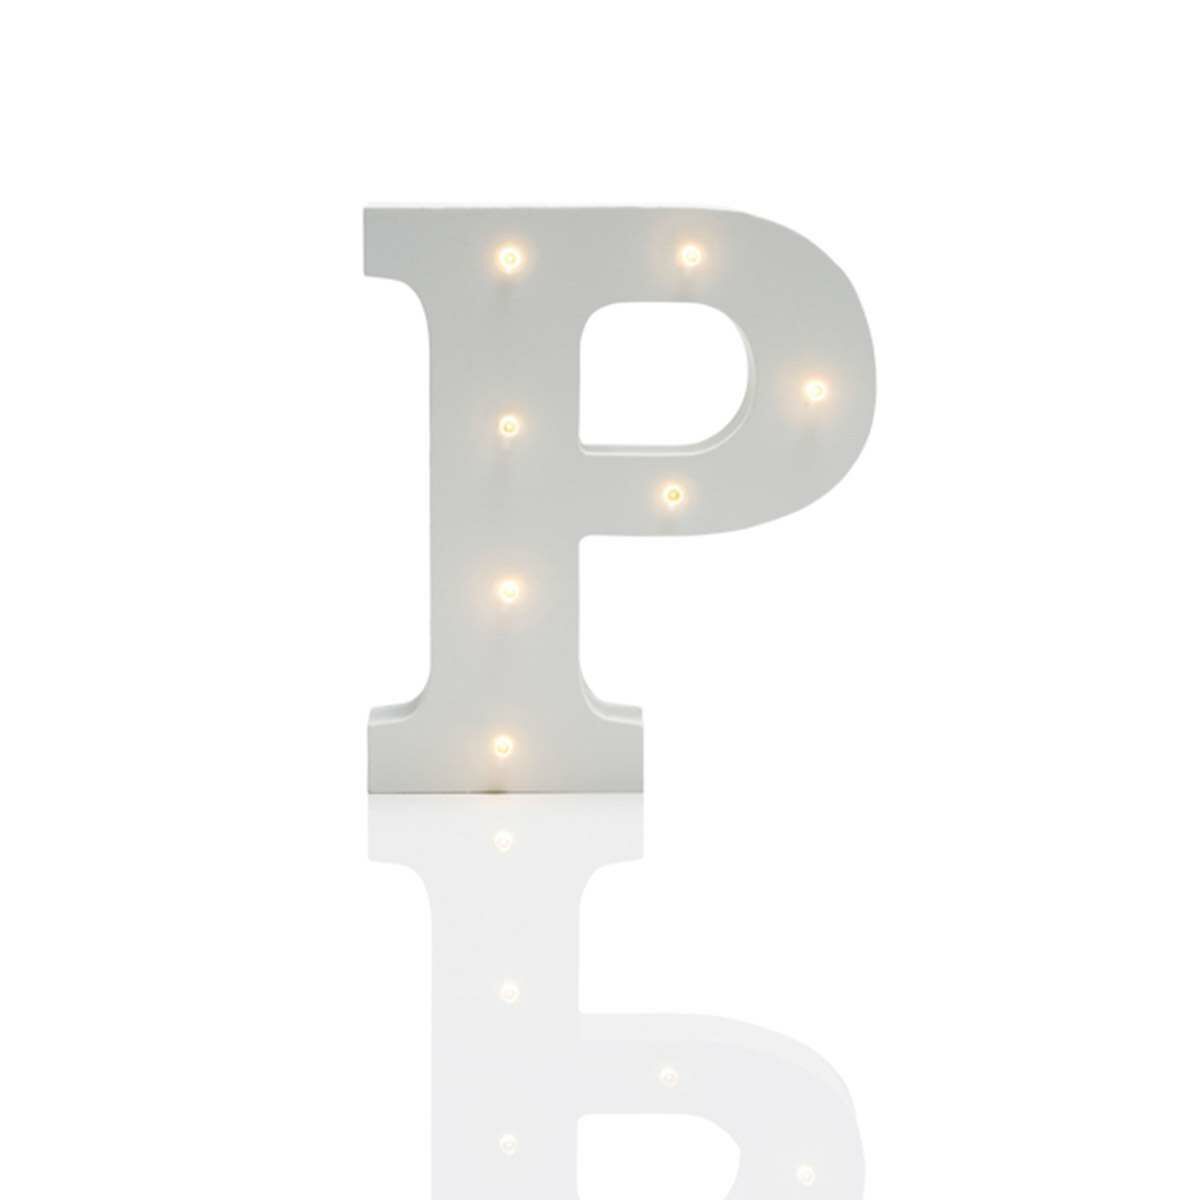 Alphabet 'P' Marquee Battery Light Up Circus Letter, Warm White LEDs, 16cm image 2